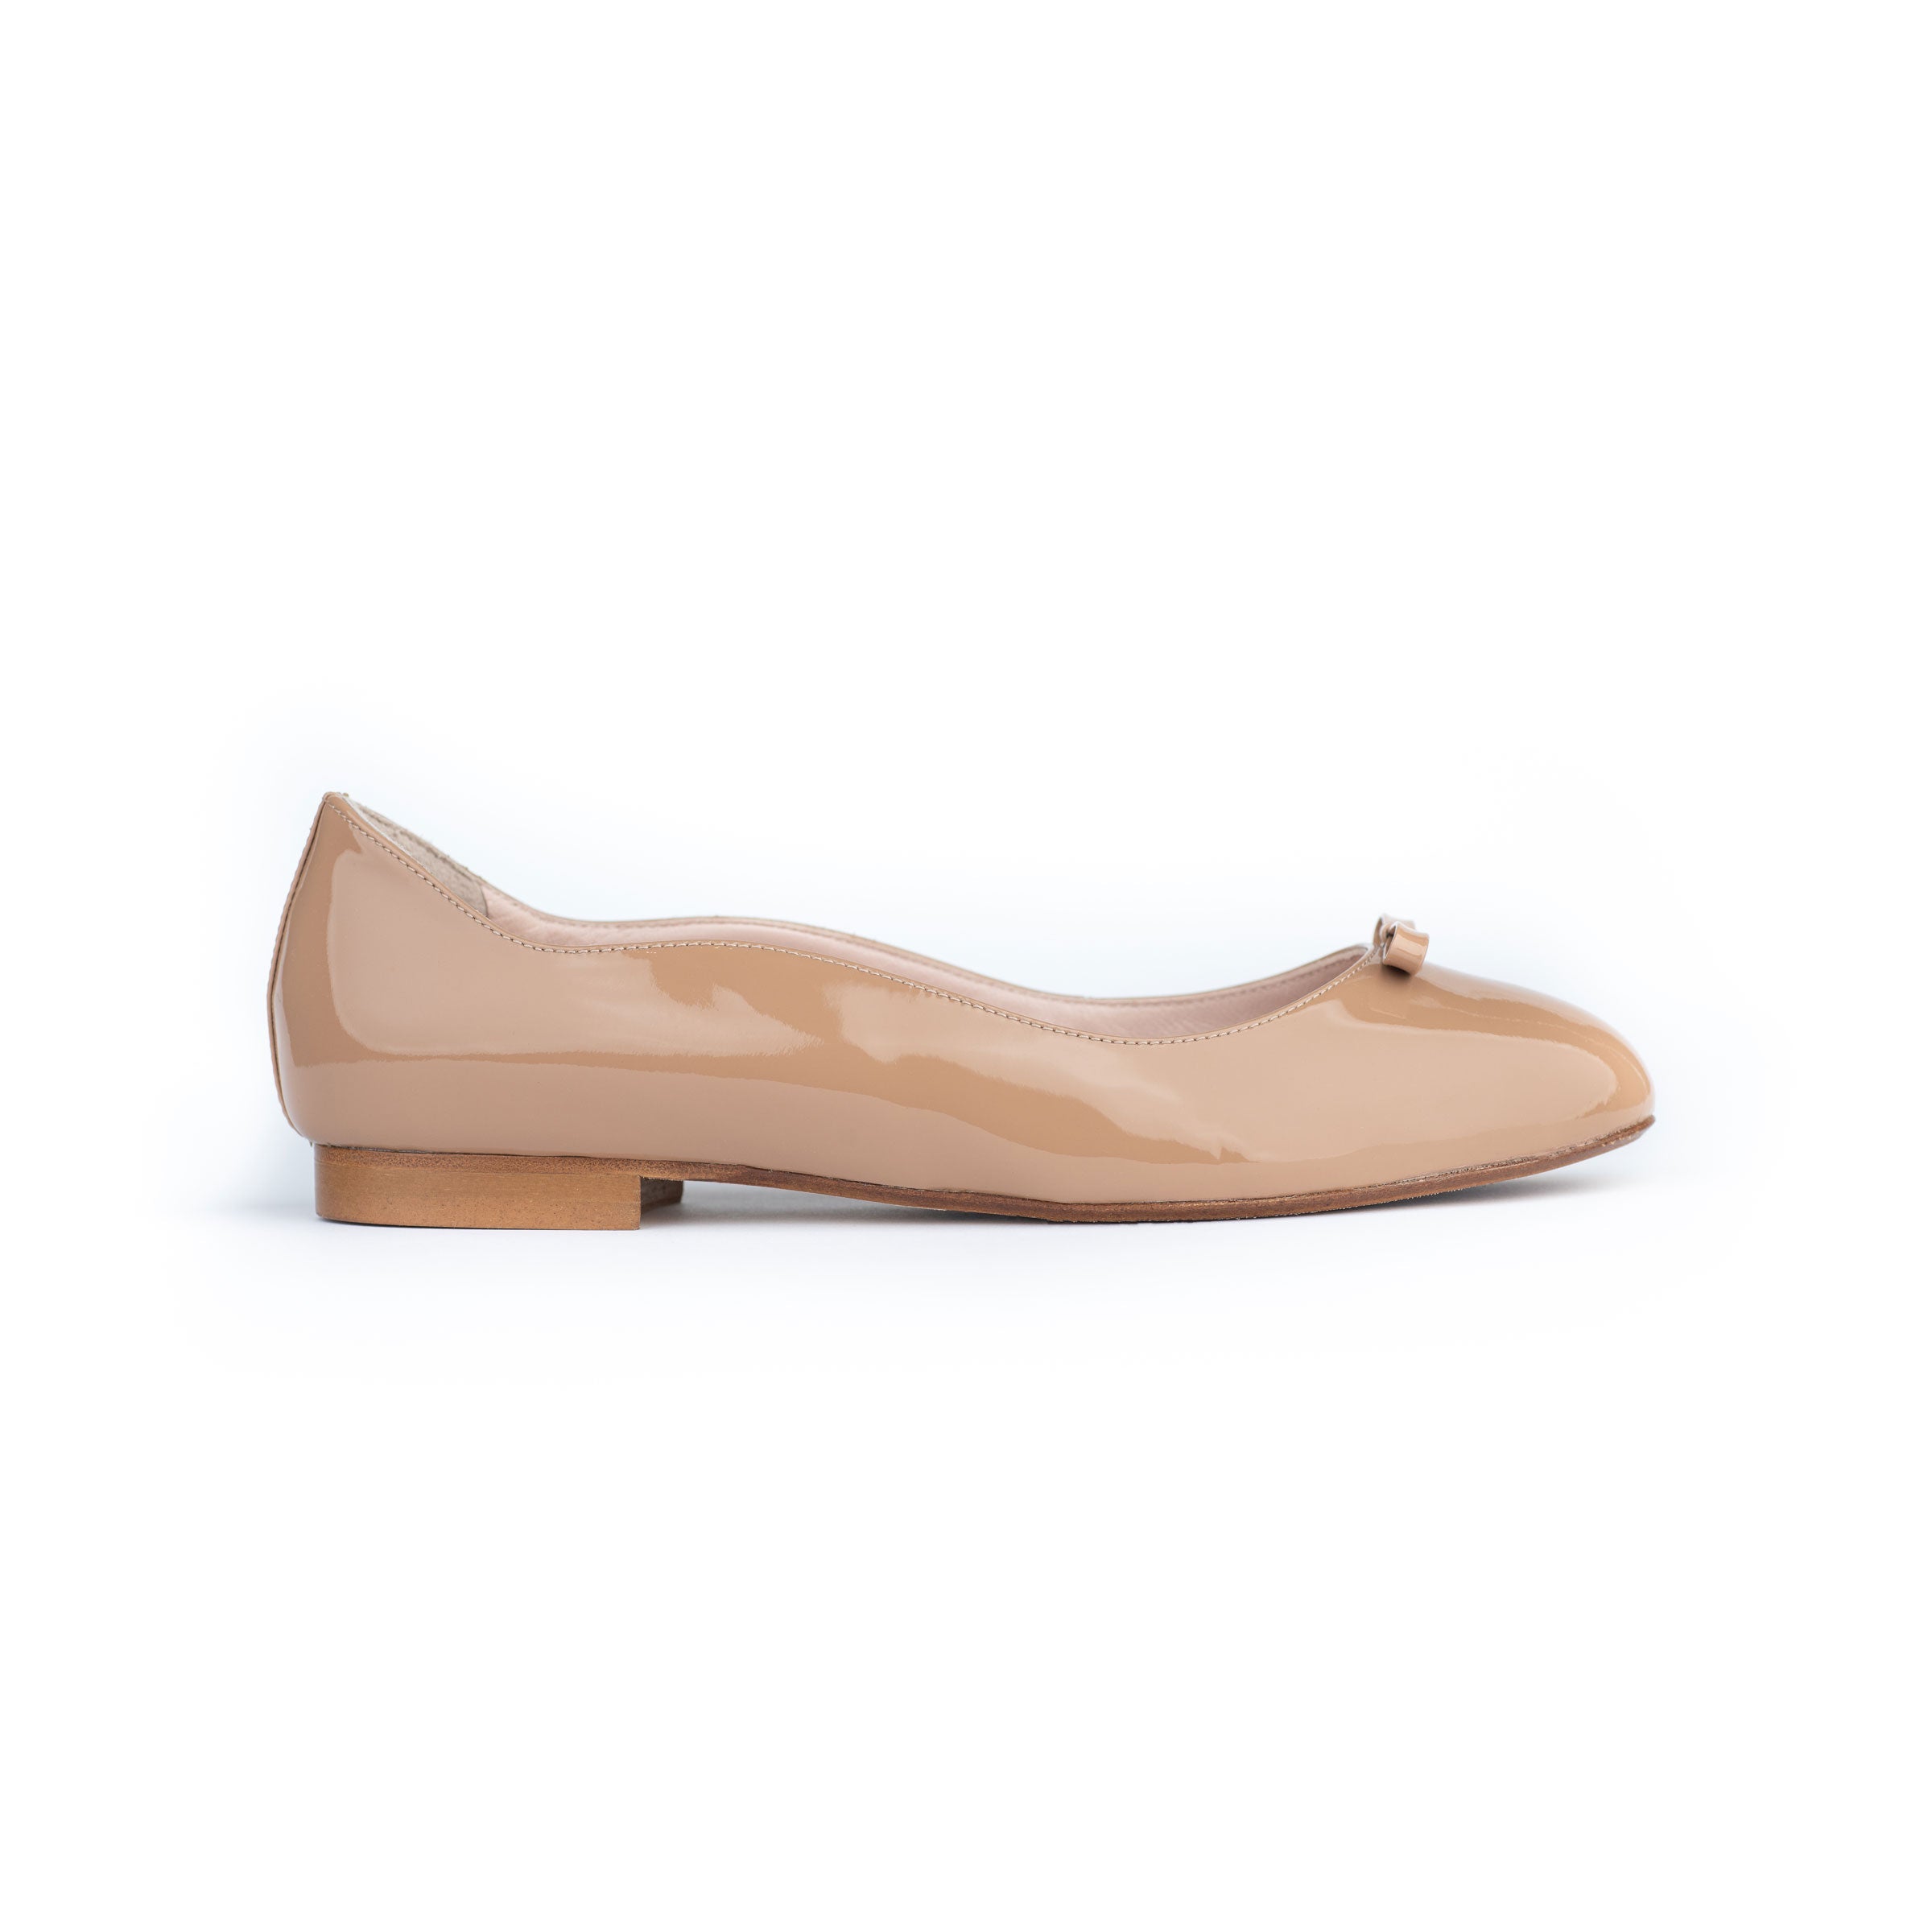 oleah shoes patent ballerina flats in nude pecan, nude ballerina patent flats, nude ballerina flats, nude patent flats